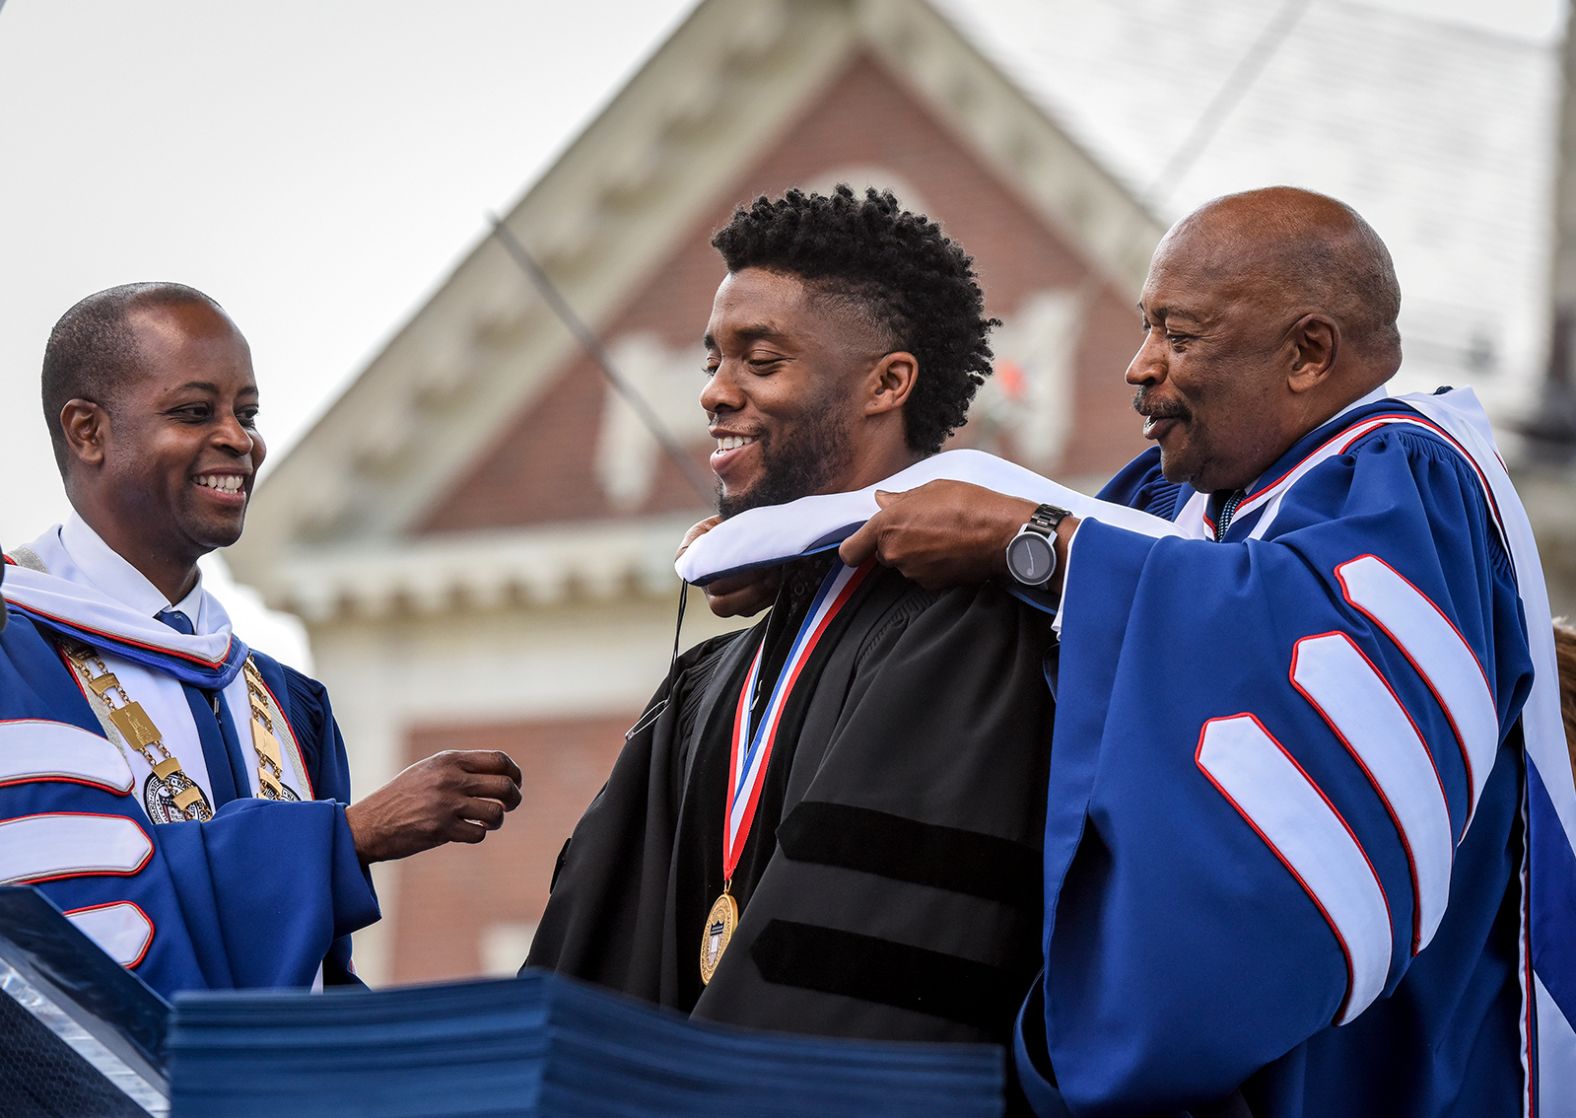 Boseman is awarded an honorary degree as he <a href="index.php?page=&url=https%3A%2F%2Fwww.cnn.com%2F2018%2F05%2F14%2Fentertainment%2Fchadwick-boseman-howard-commencement-speech-trnd%2F" target="_blank">gives a graduation speech</a> at Howard University in Washington, DC. Boseman got his bachelor's degree from Howard in 2000.